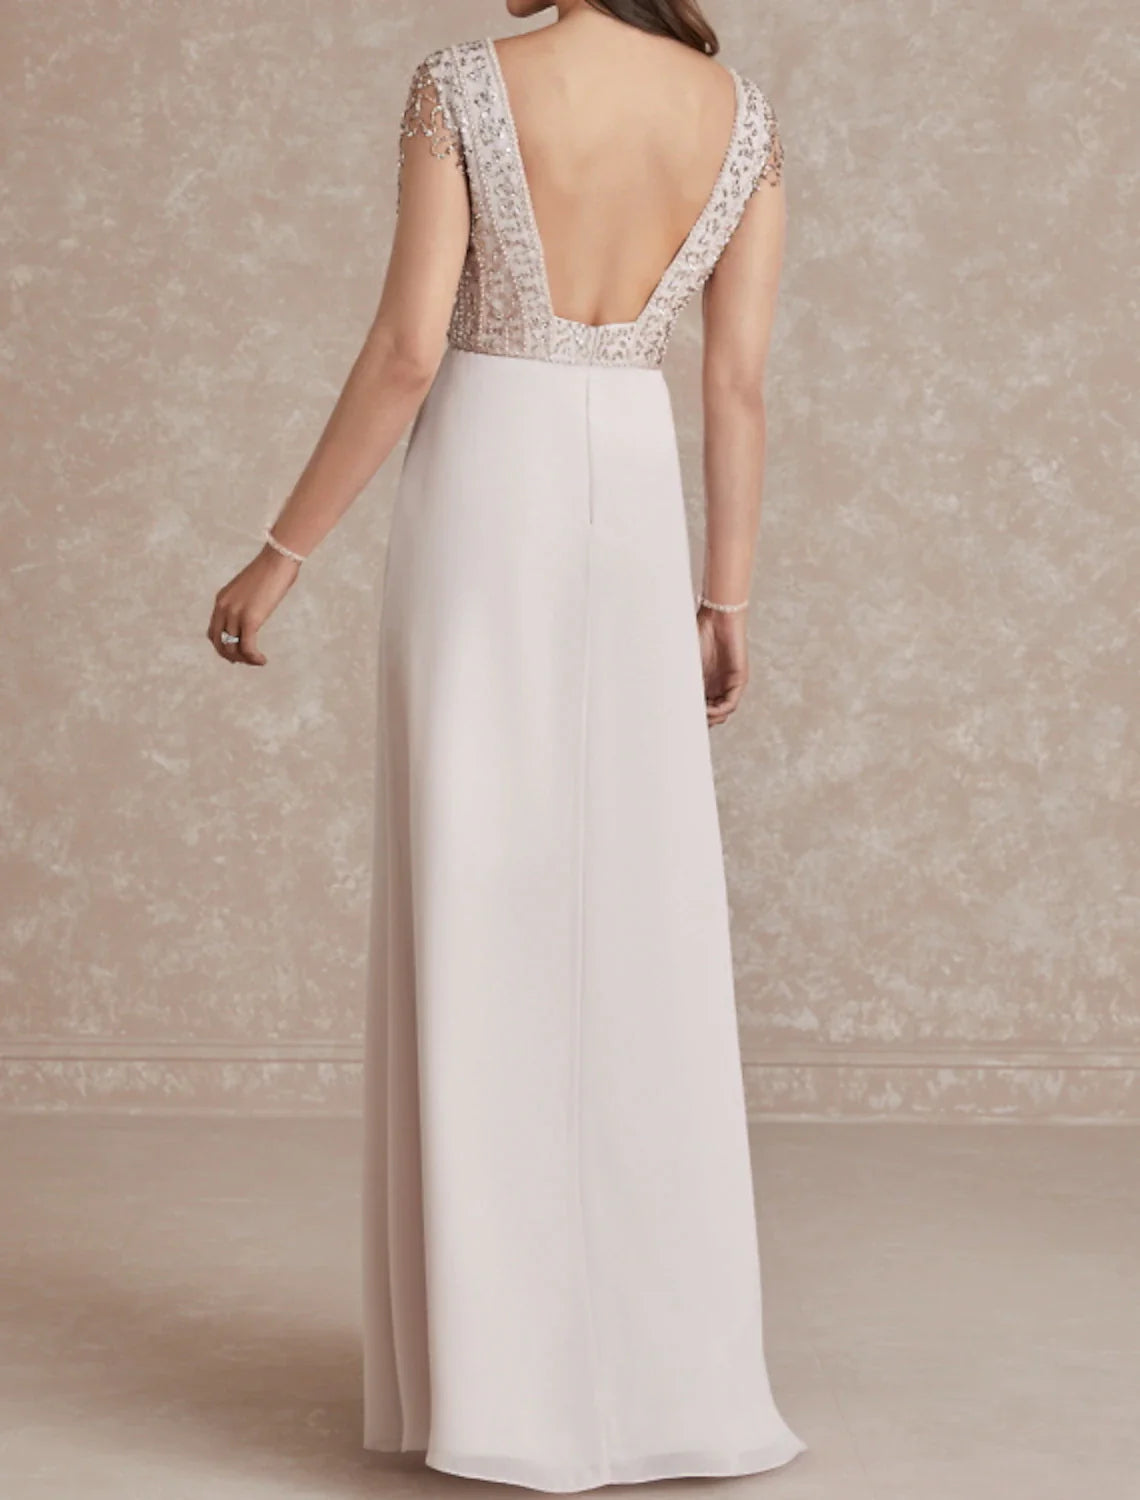 A-Line Evening Gown Glittering Dress Engagement Sweep / Brush Train Short Sleeve V Neck Chiffon with Sequin Slit